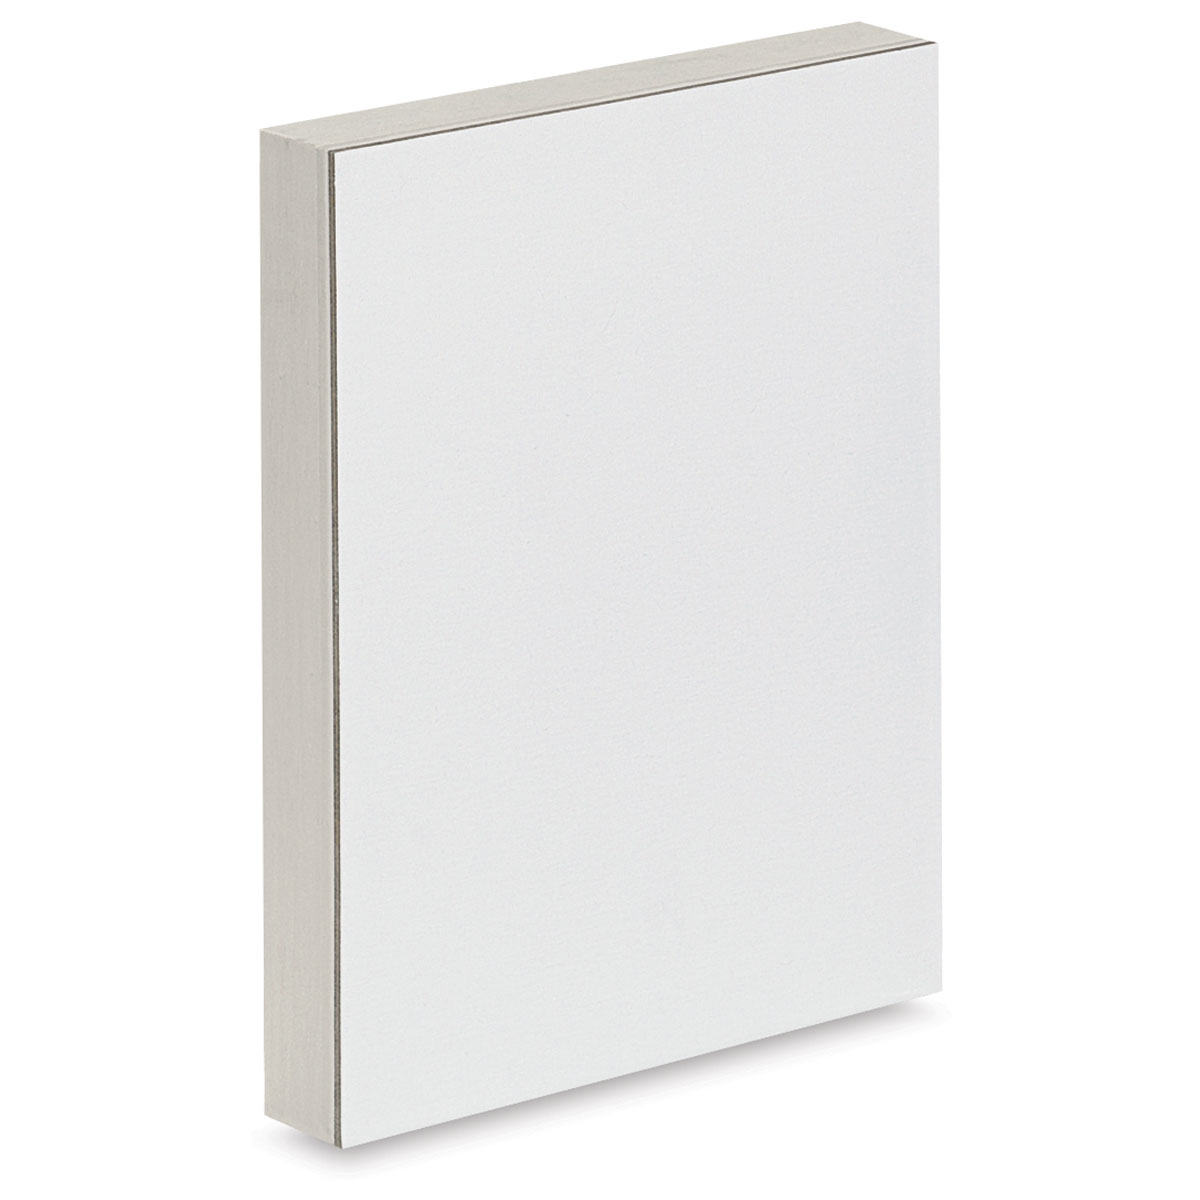 2 Blick Studio Canvas Boards for Painting Canvas Panels for